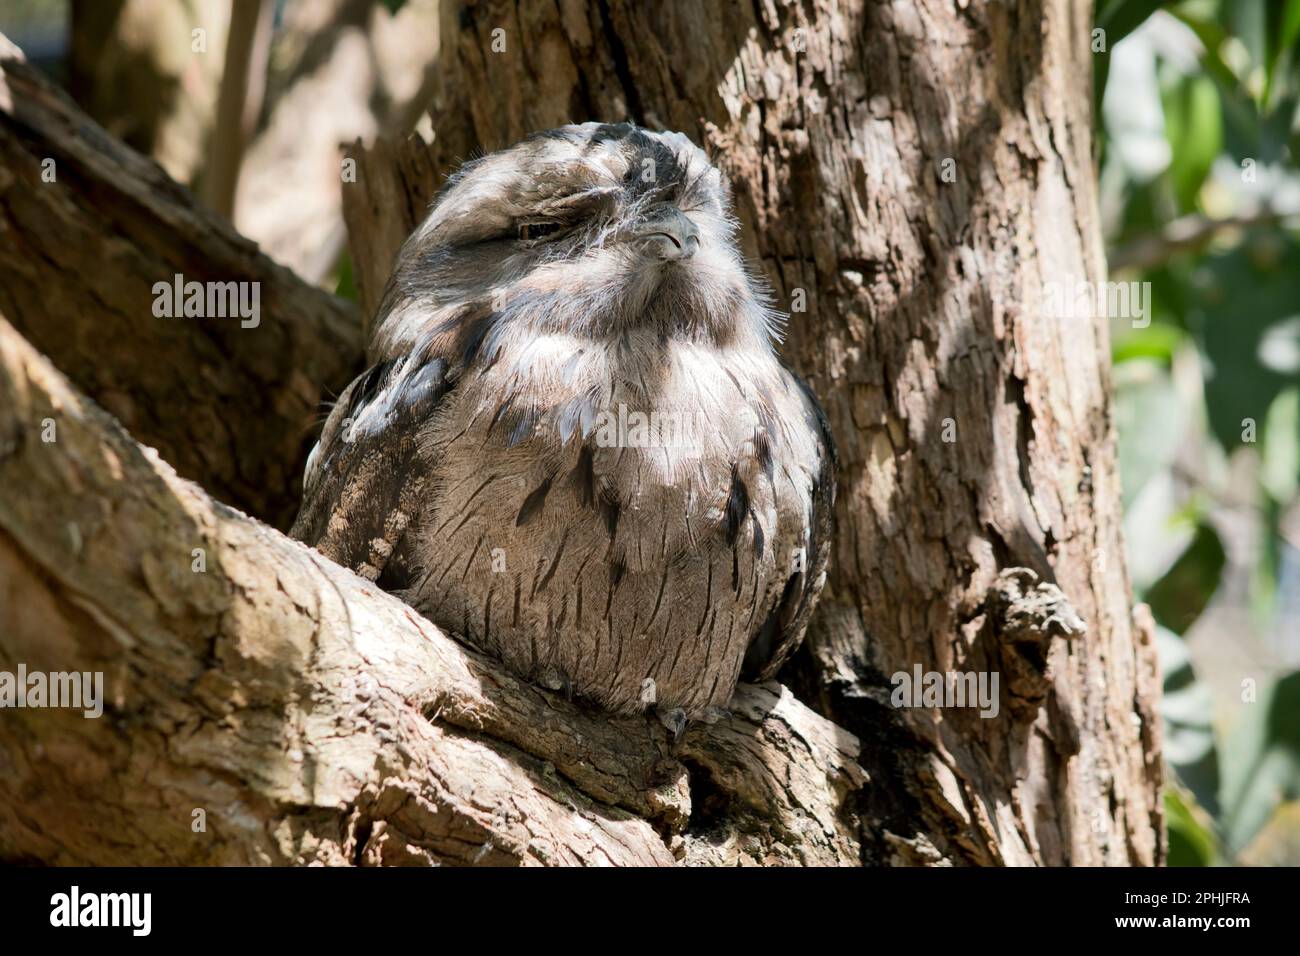 the tawny frogmouth uses it coloring to hide from preditors as it blends in with a tree Stock Photo